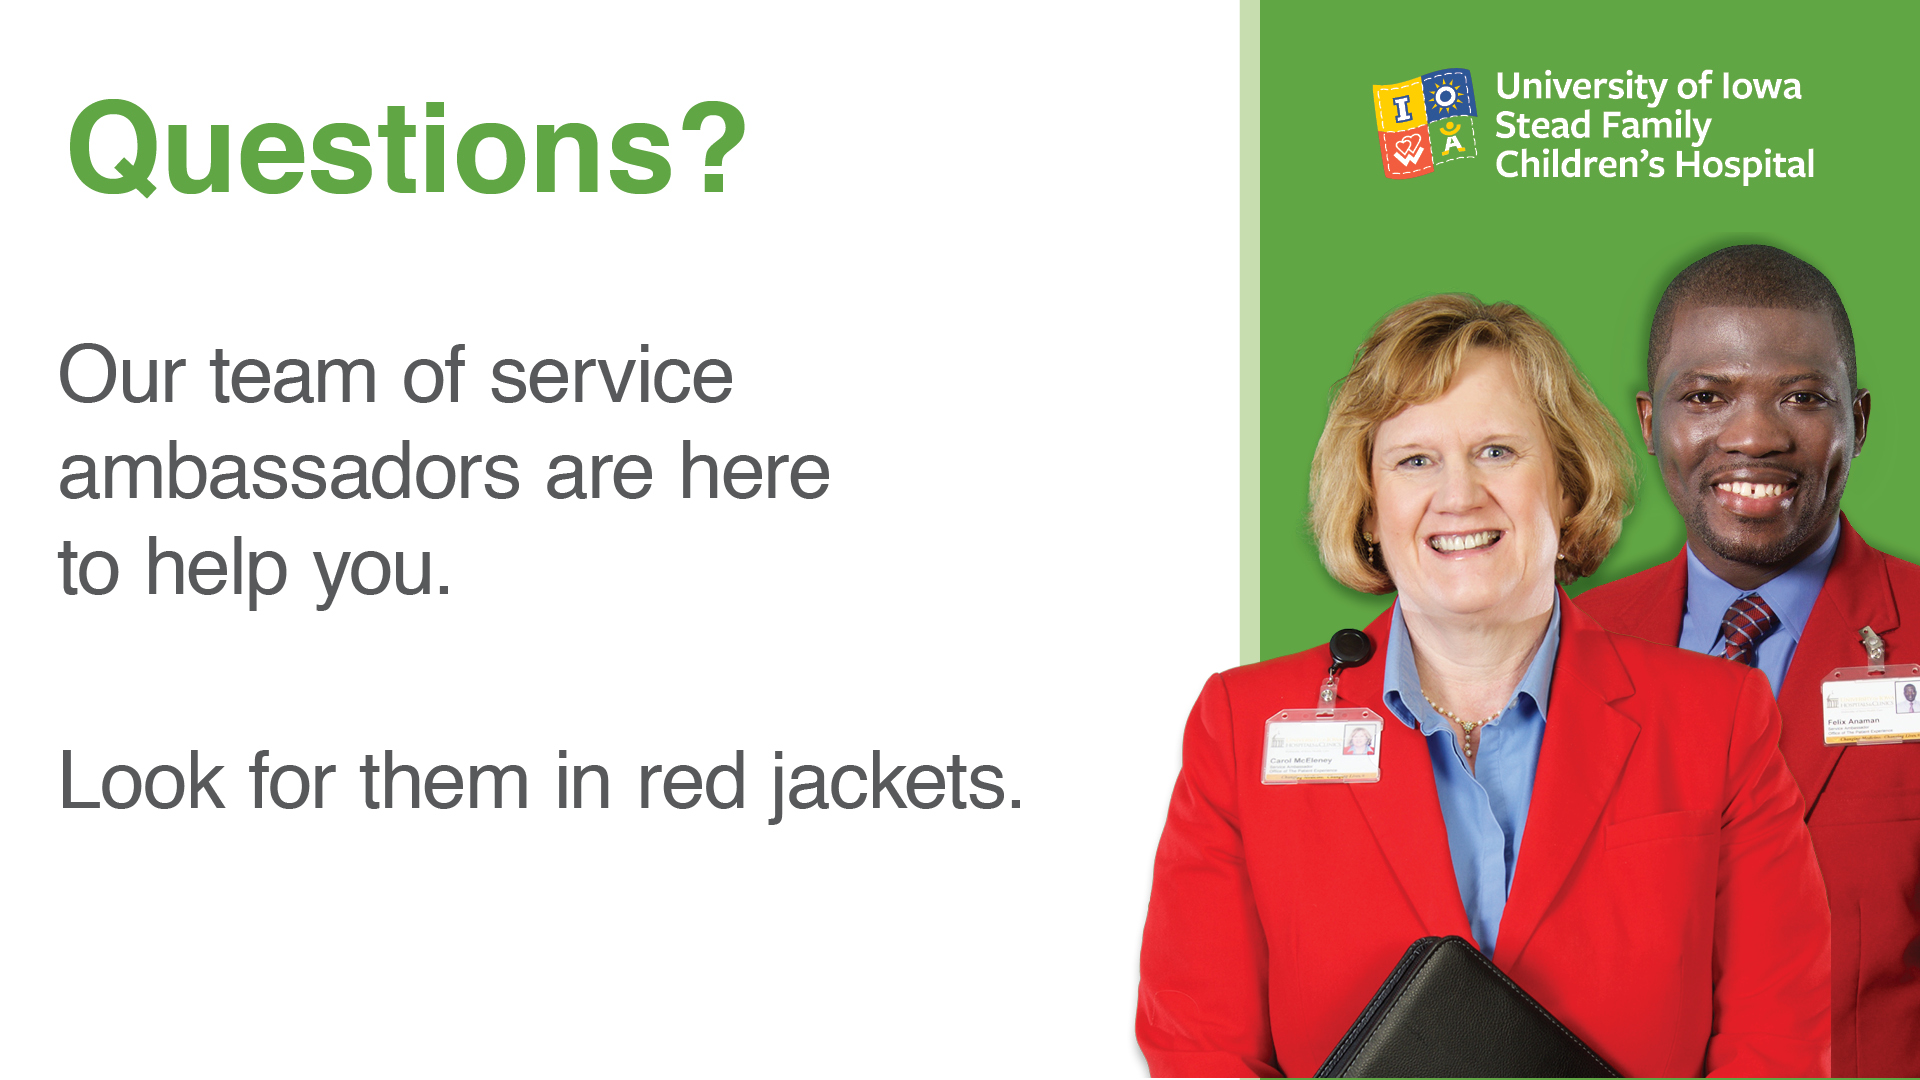 Our team of service ambassadors are here to help you. Look for them in red jackets.